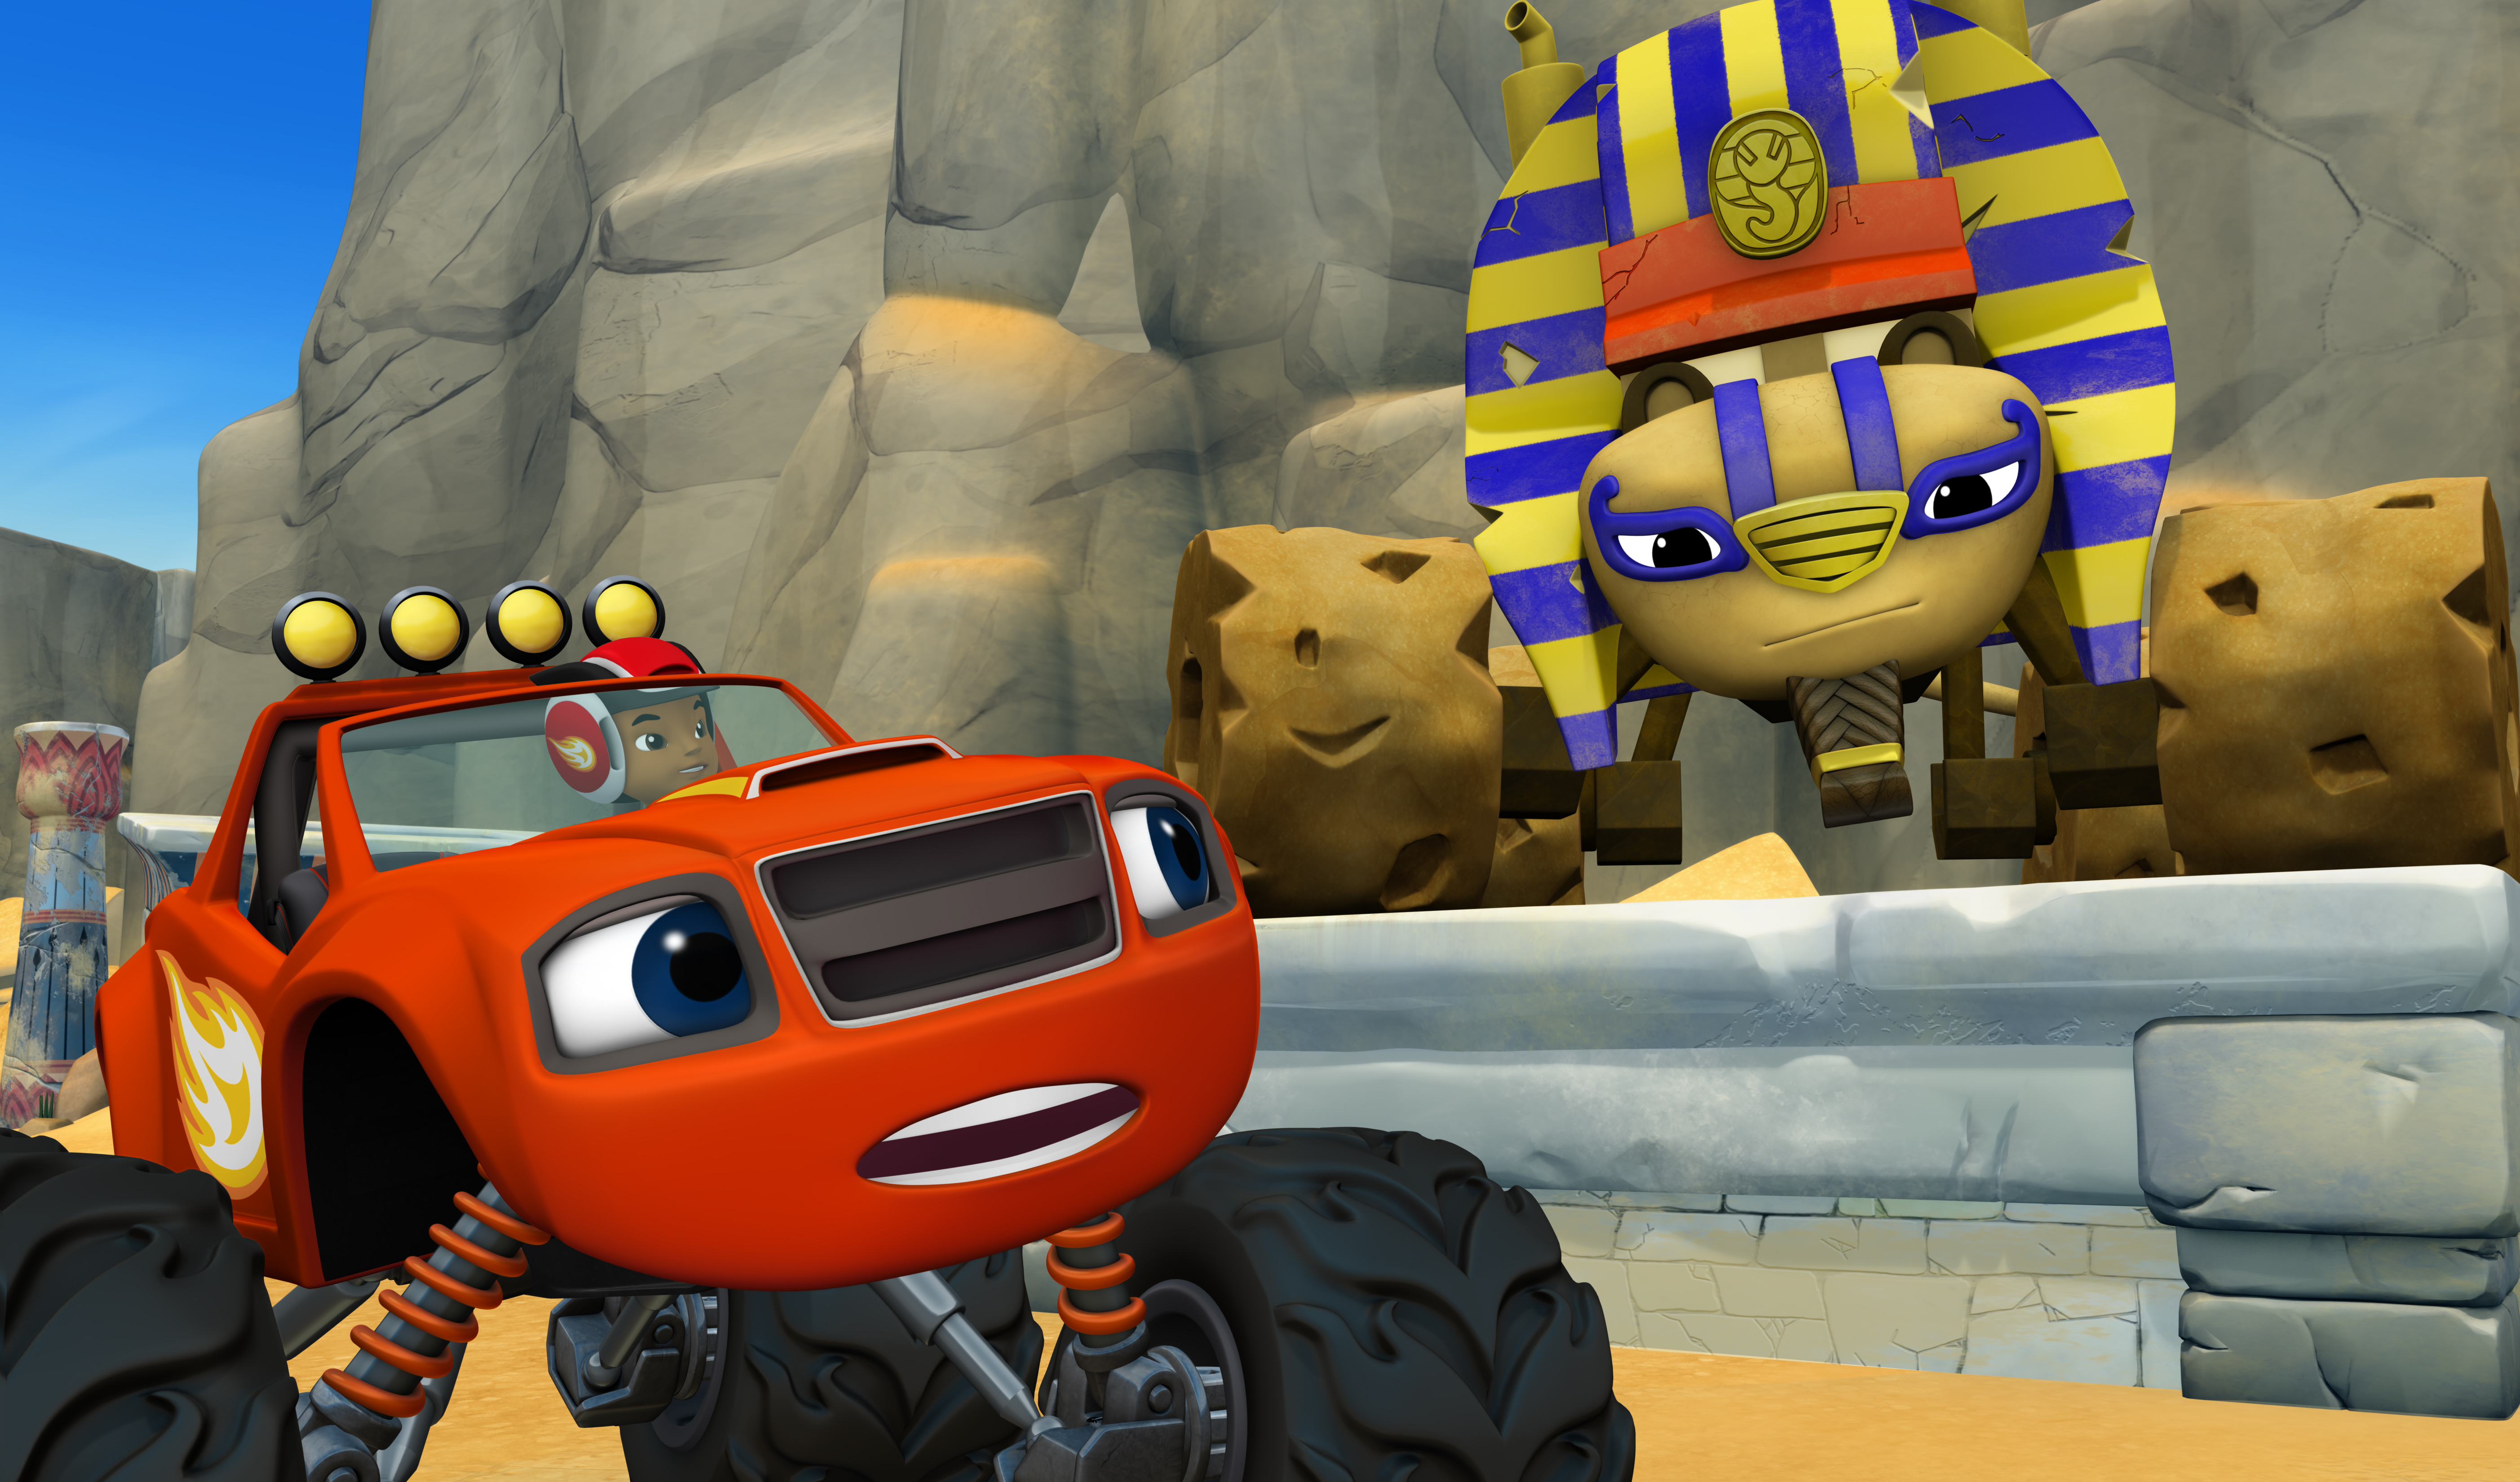 Nickelodeon Presents Epic Blaze and the Monster Machines Prime Time Special...